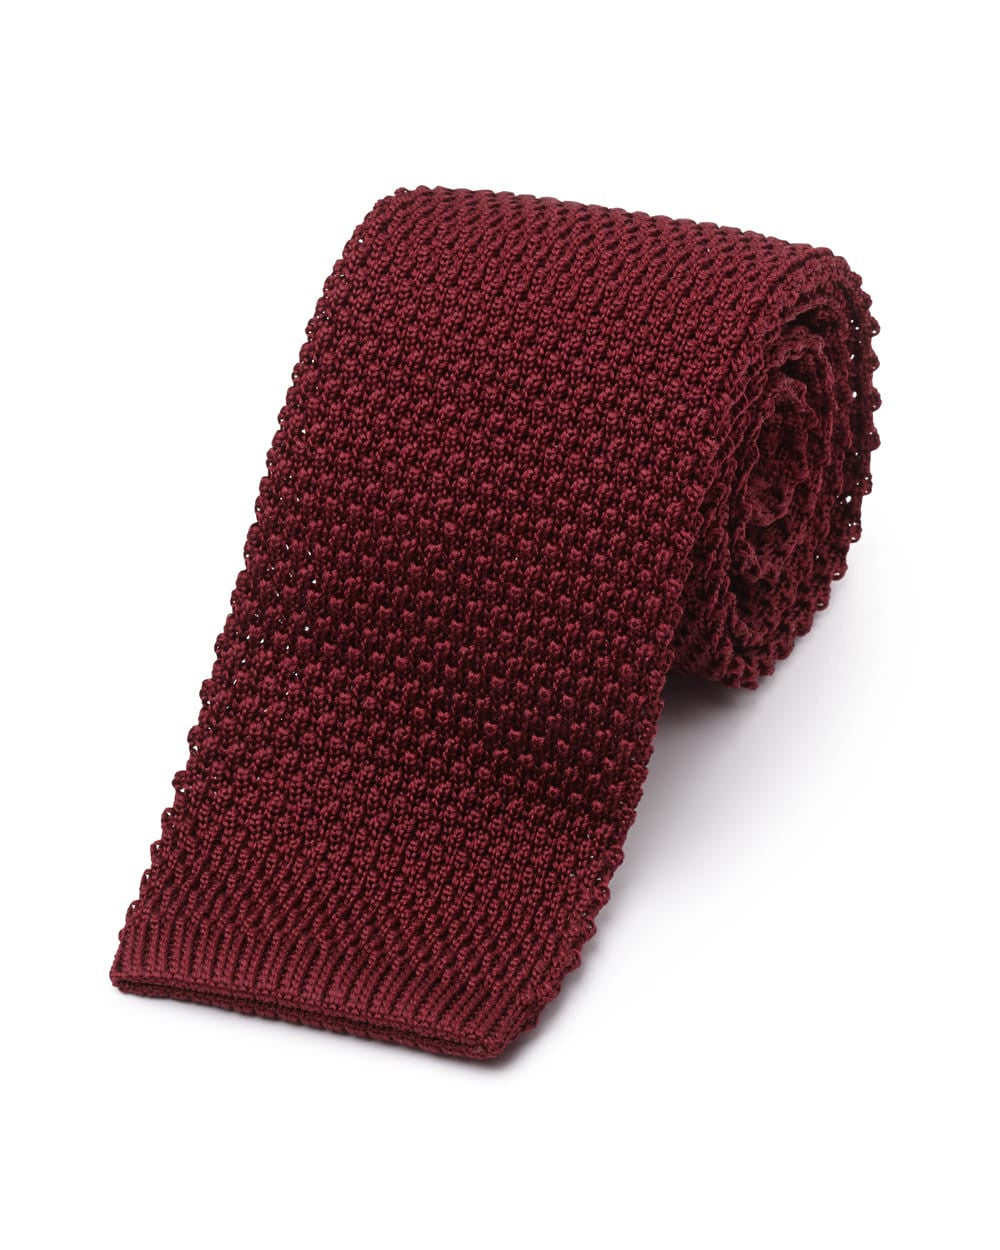 Silk knitted Tie - Maroon - once a day